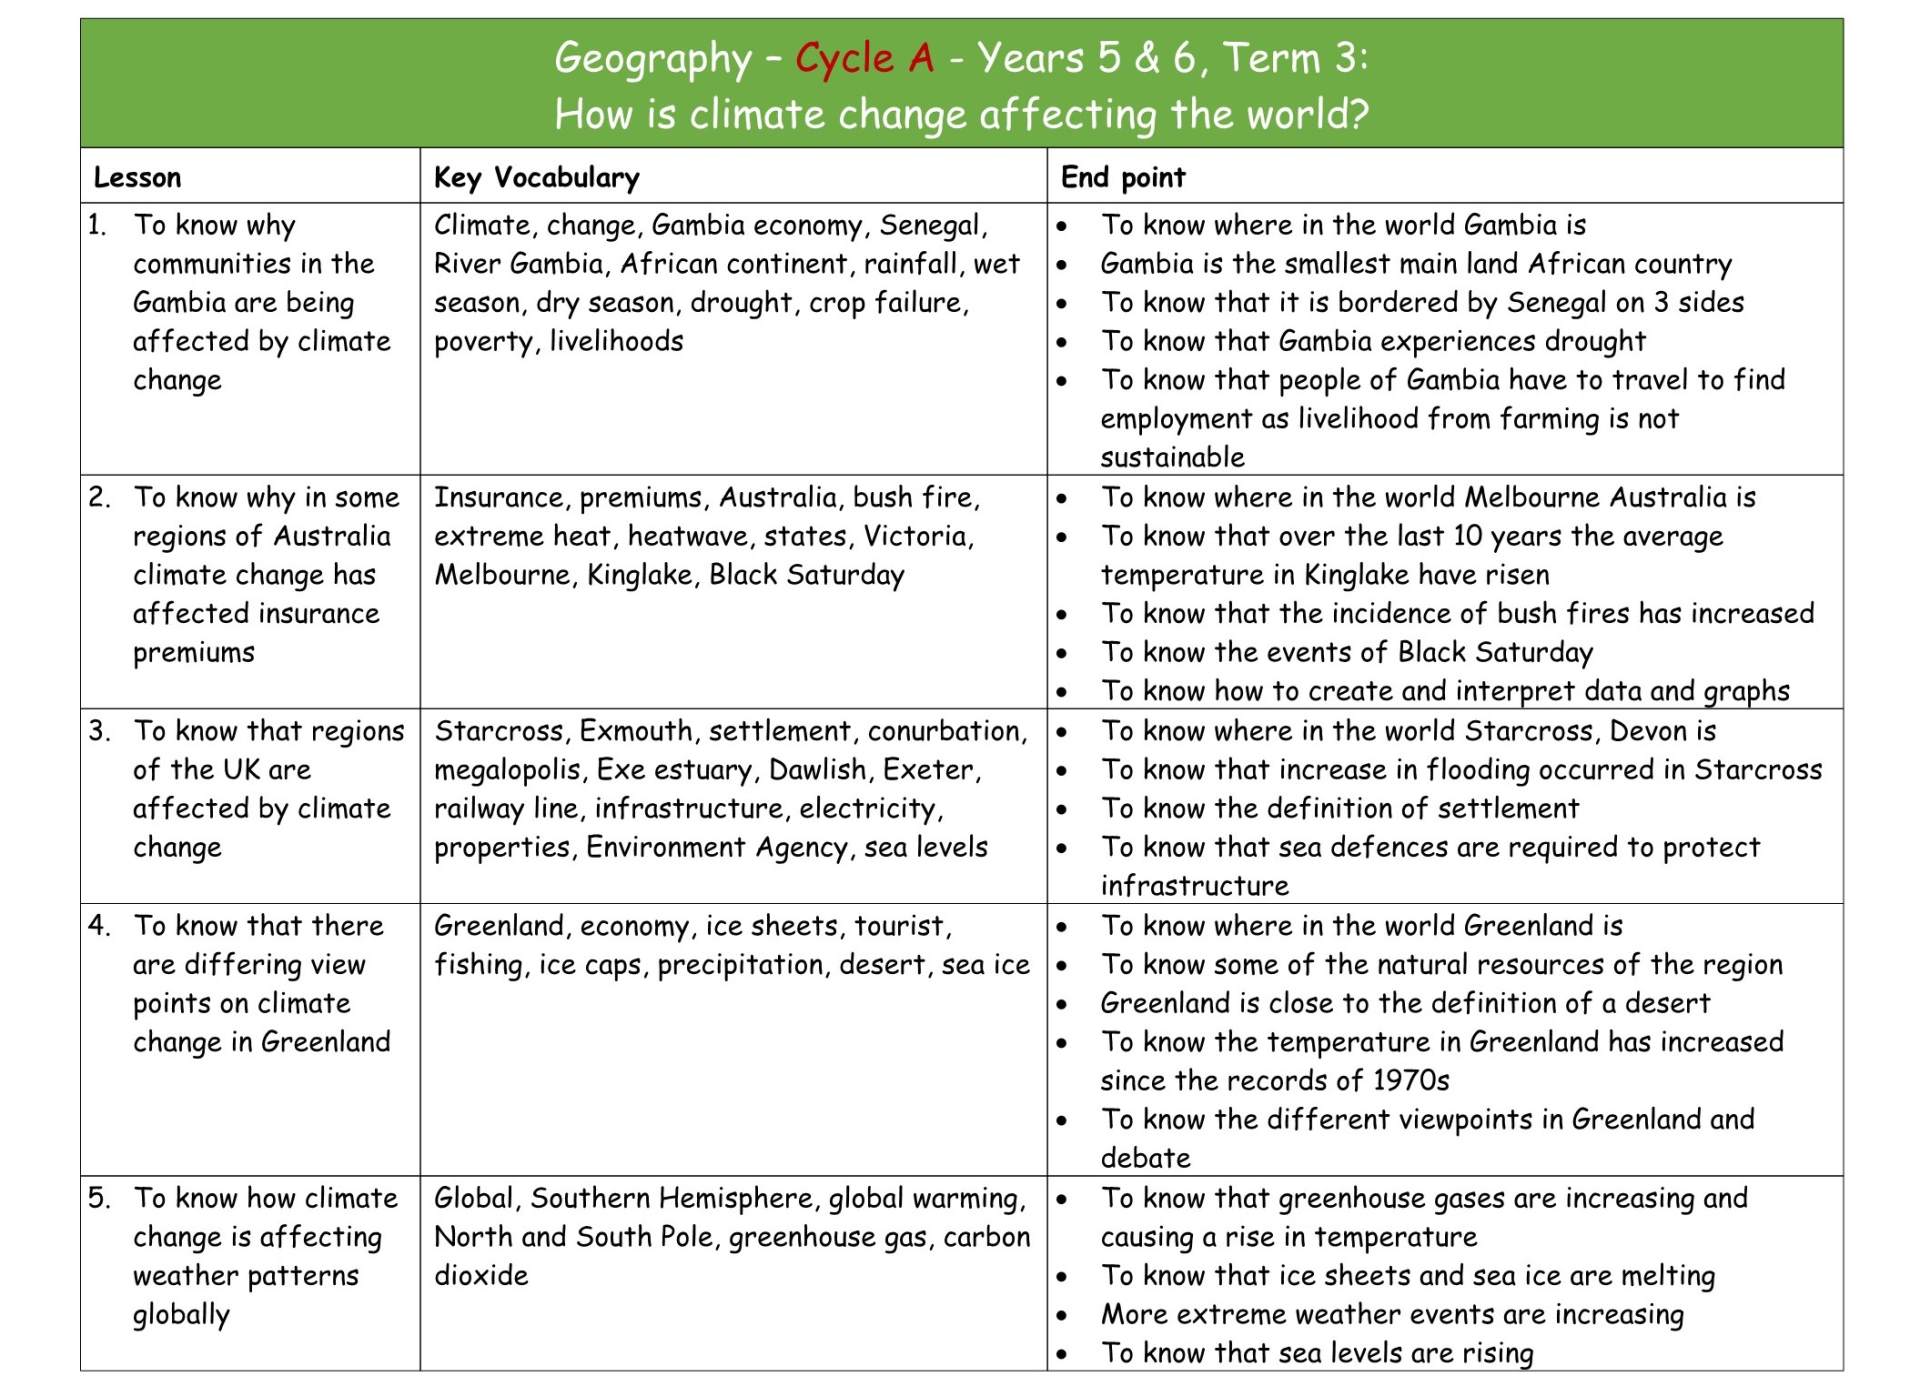 Geography Y3&4 Cycle A MTP T3